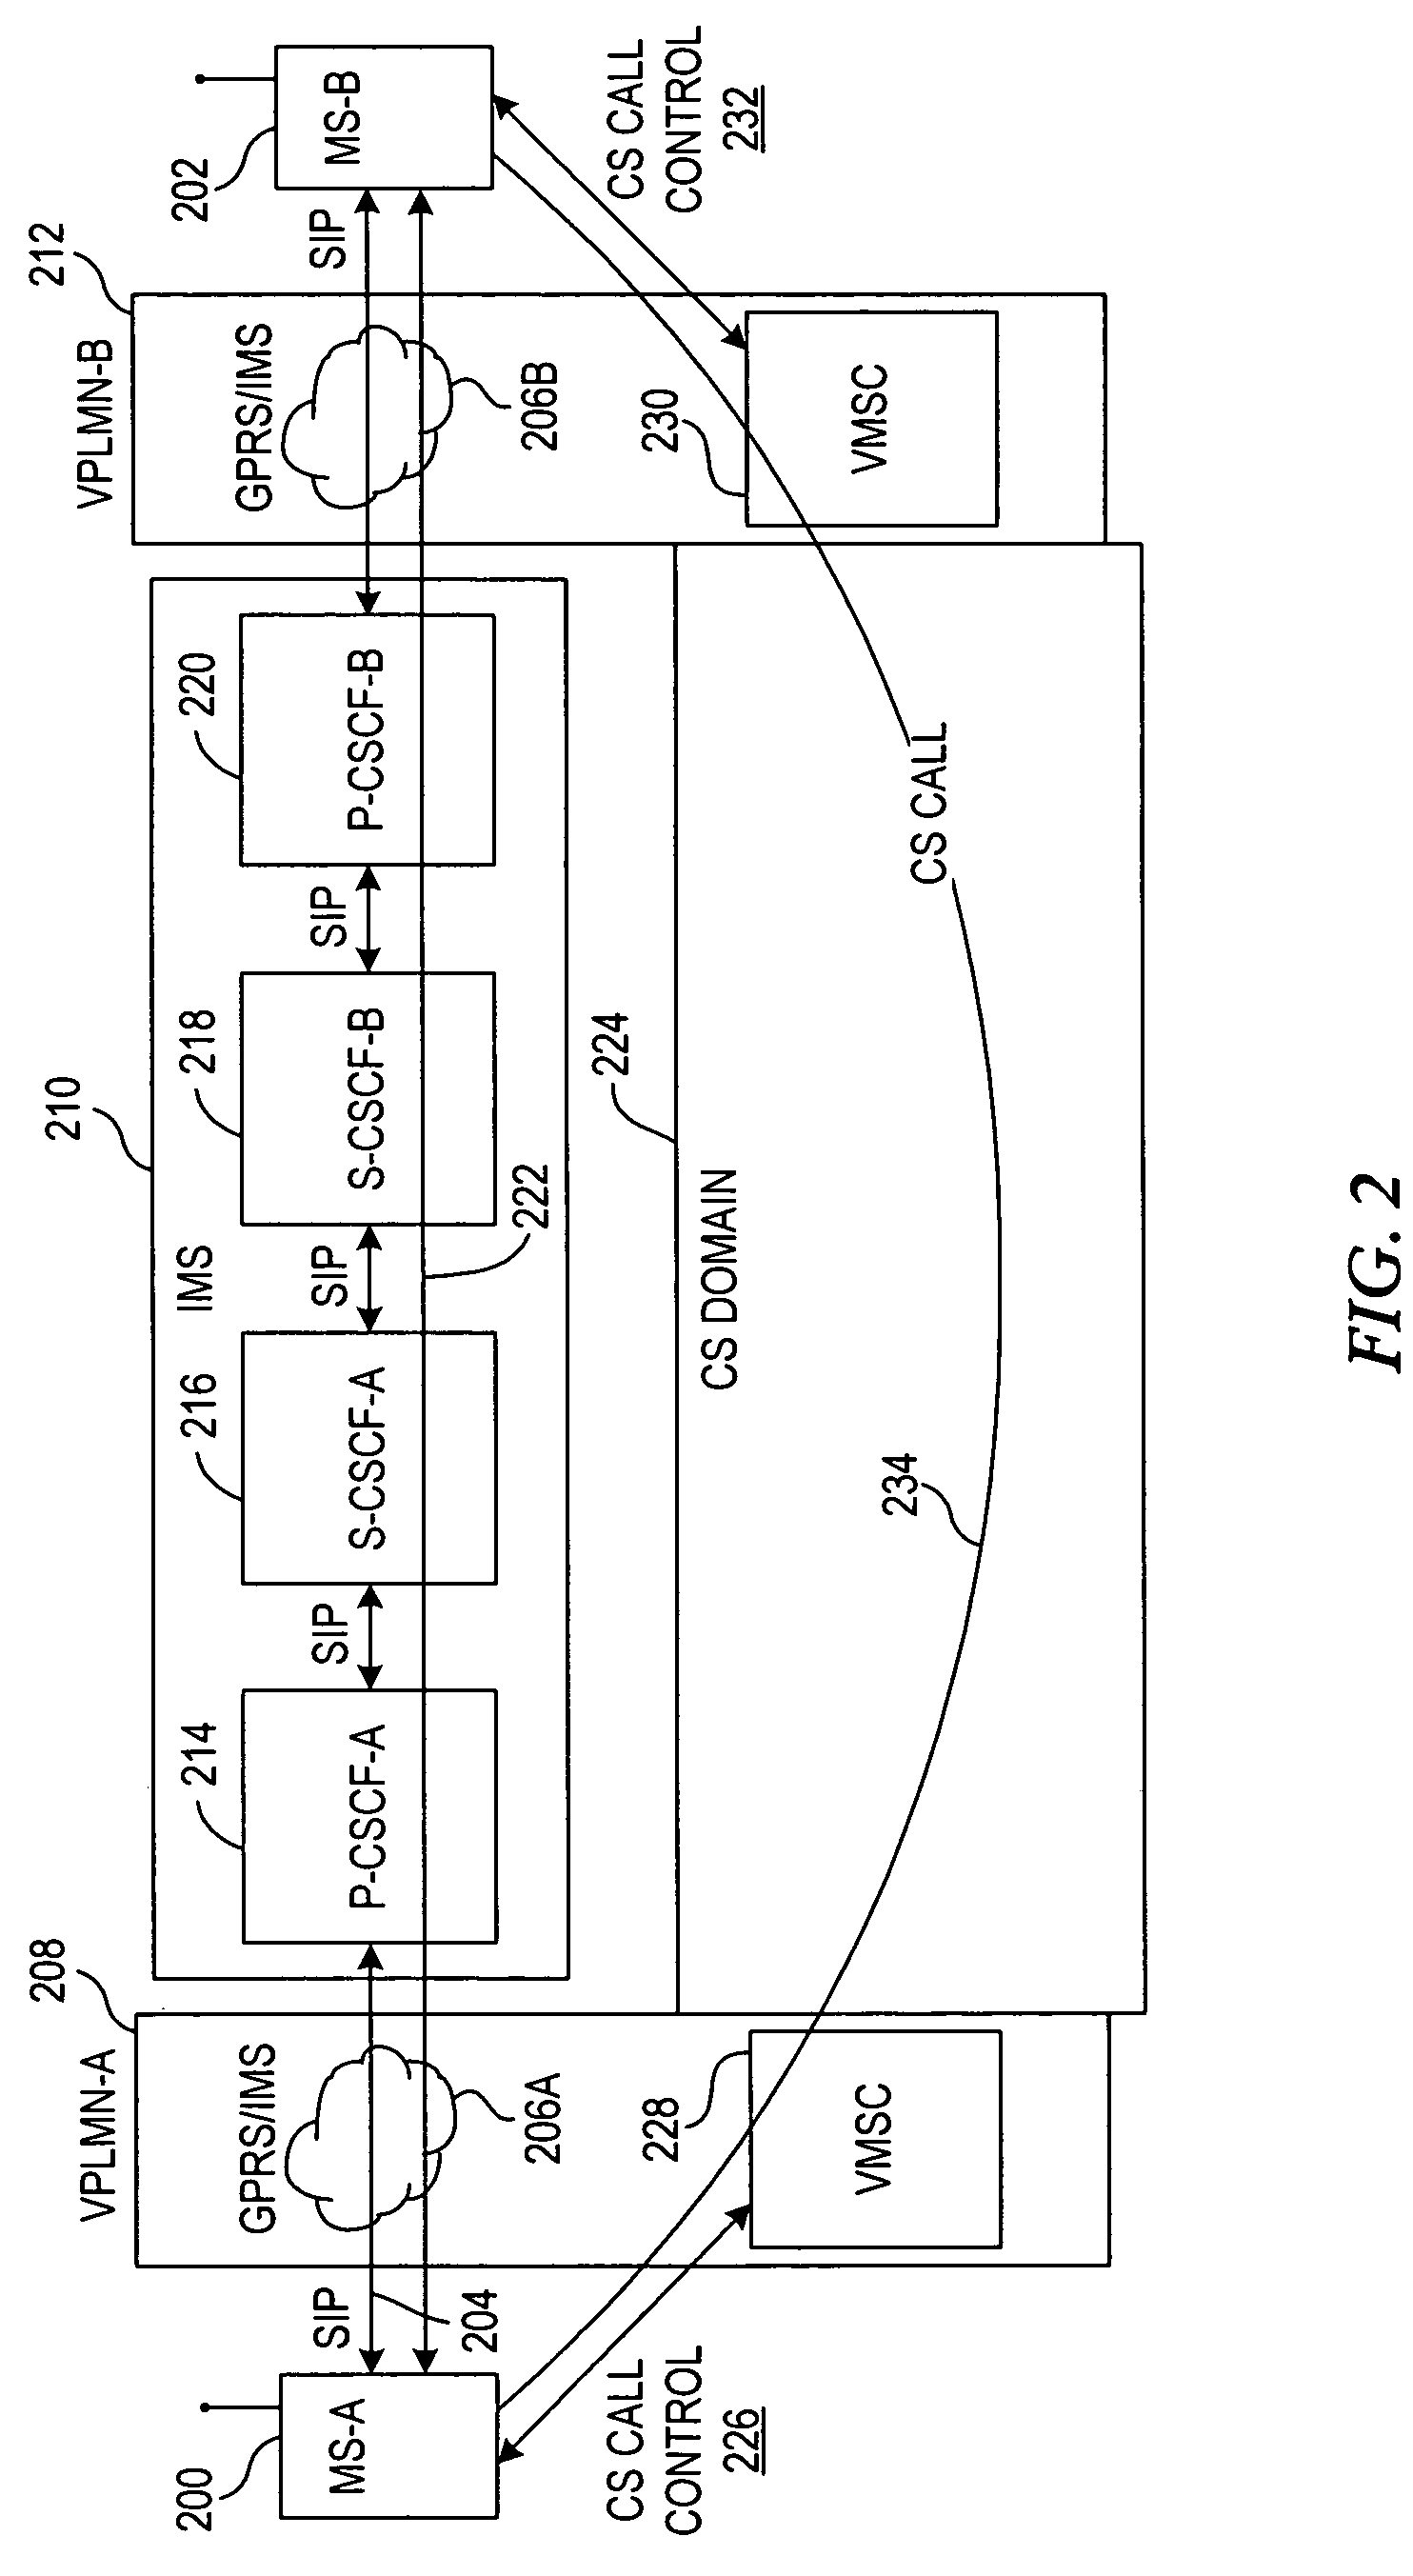 System, apparatus, and method for establishing circuit-switched communications via packet-switched network signaling